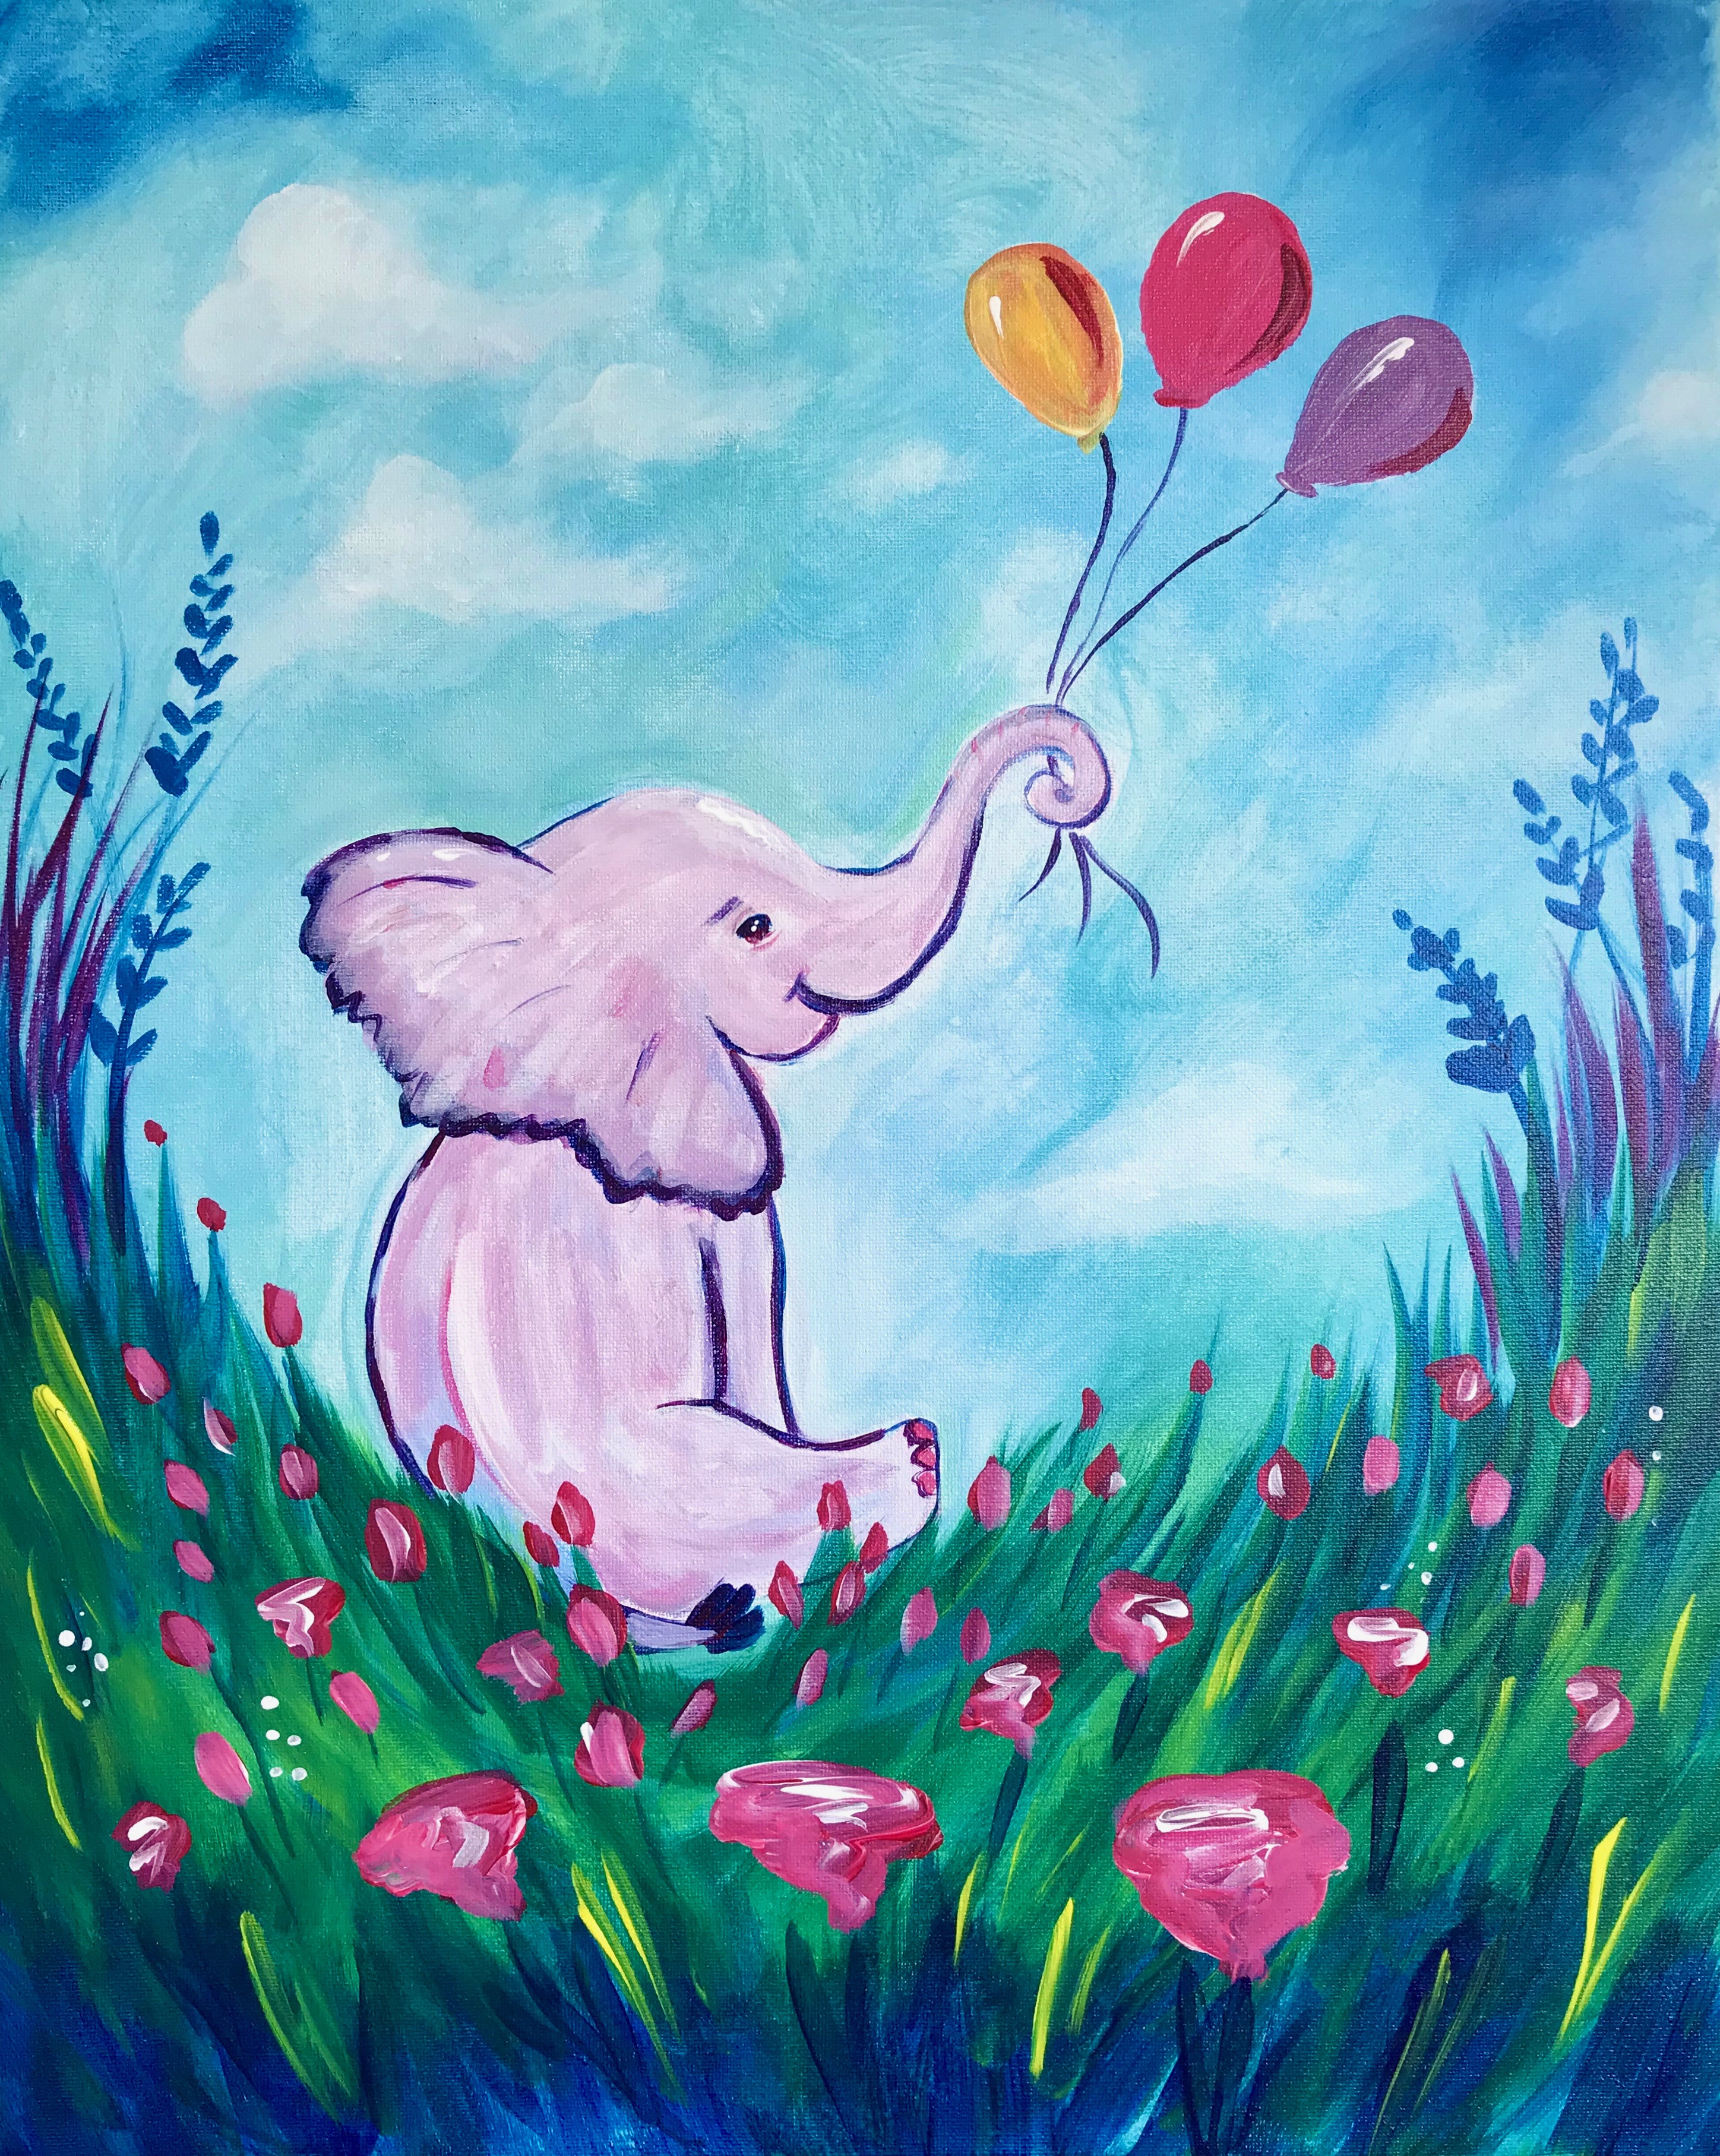 A Baby Elephant Balloons experience project by Yaymaker